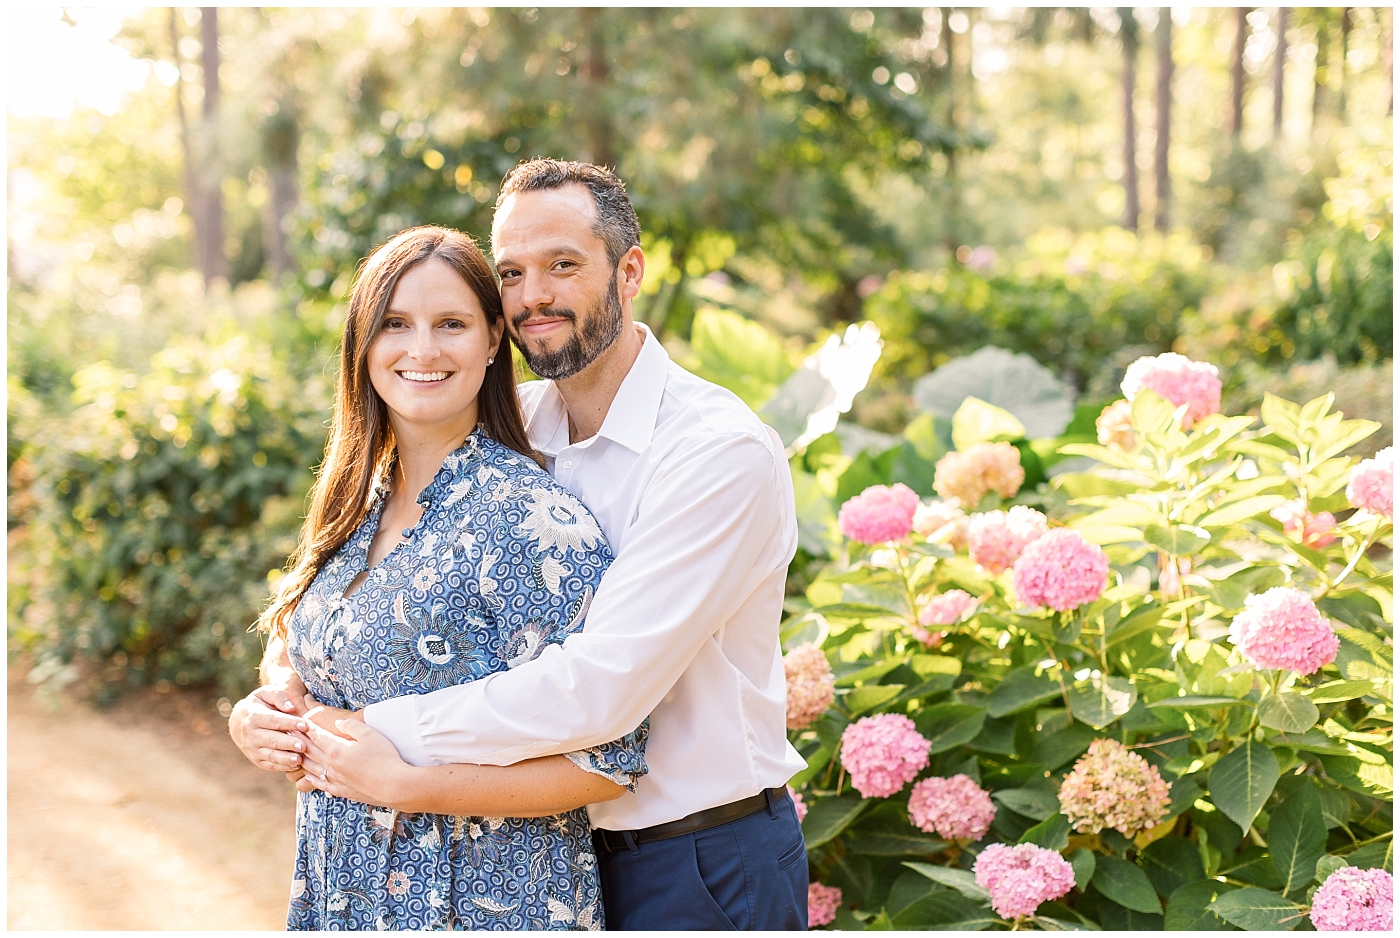 Summer engagement photos at WRAL Gardens and Fresh Local Ice Cream in Raleigh NC